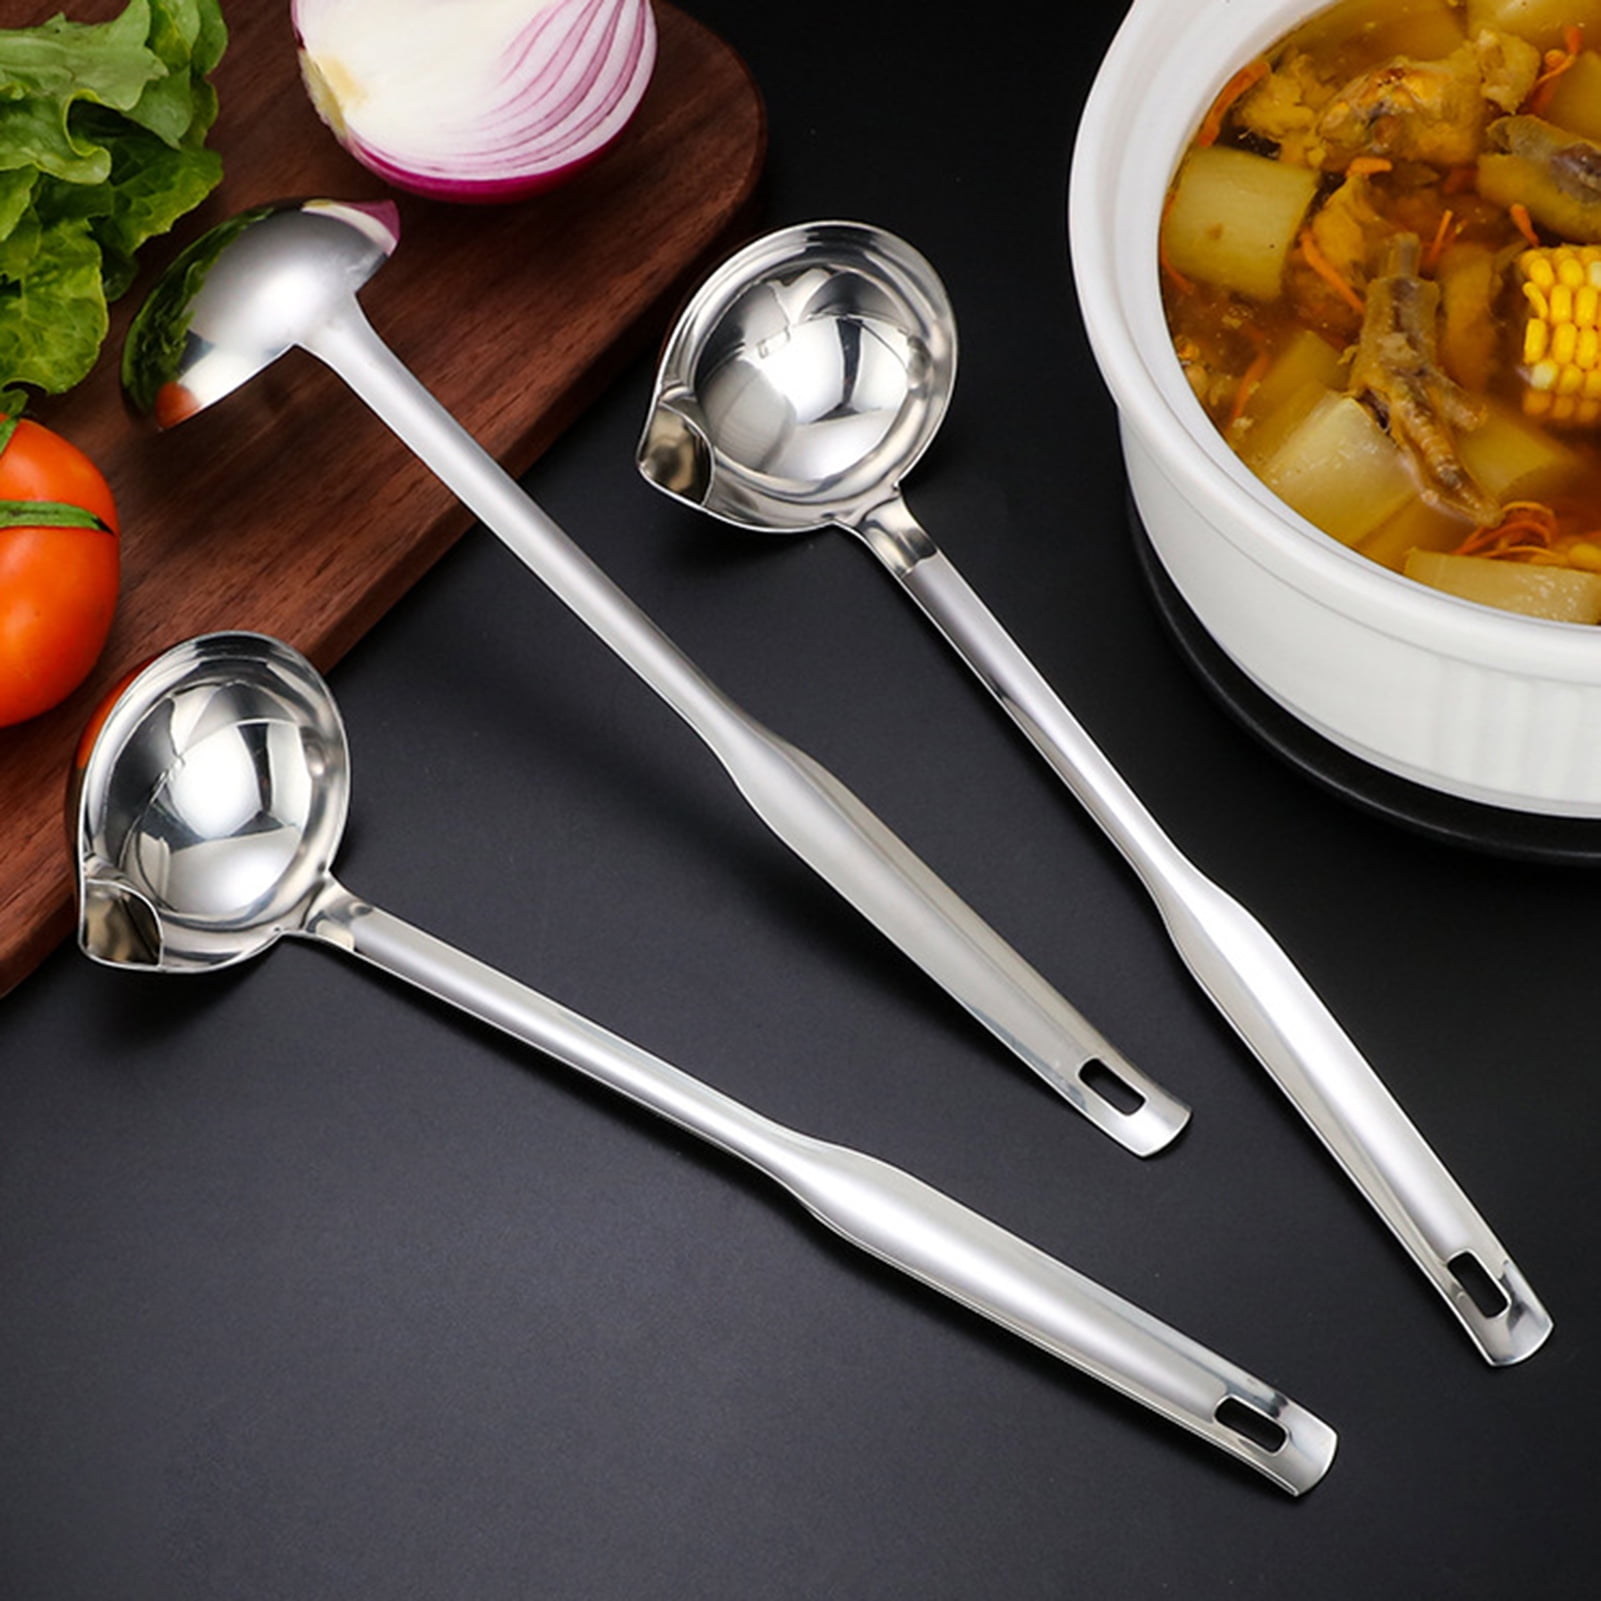 3.5411.02inch Renzhe Grease Filter Spoon for Home Kitchen Hot Pot Fat Skimmer Oil Soup Separator Spoon,Durable 304 Stainless Steel Gravy Separator with Vacuum Ergonomic Round Handle Skimmer Spoon